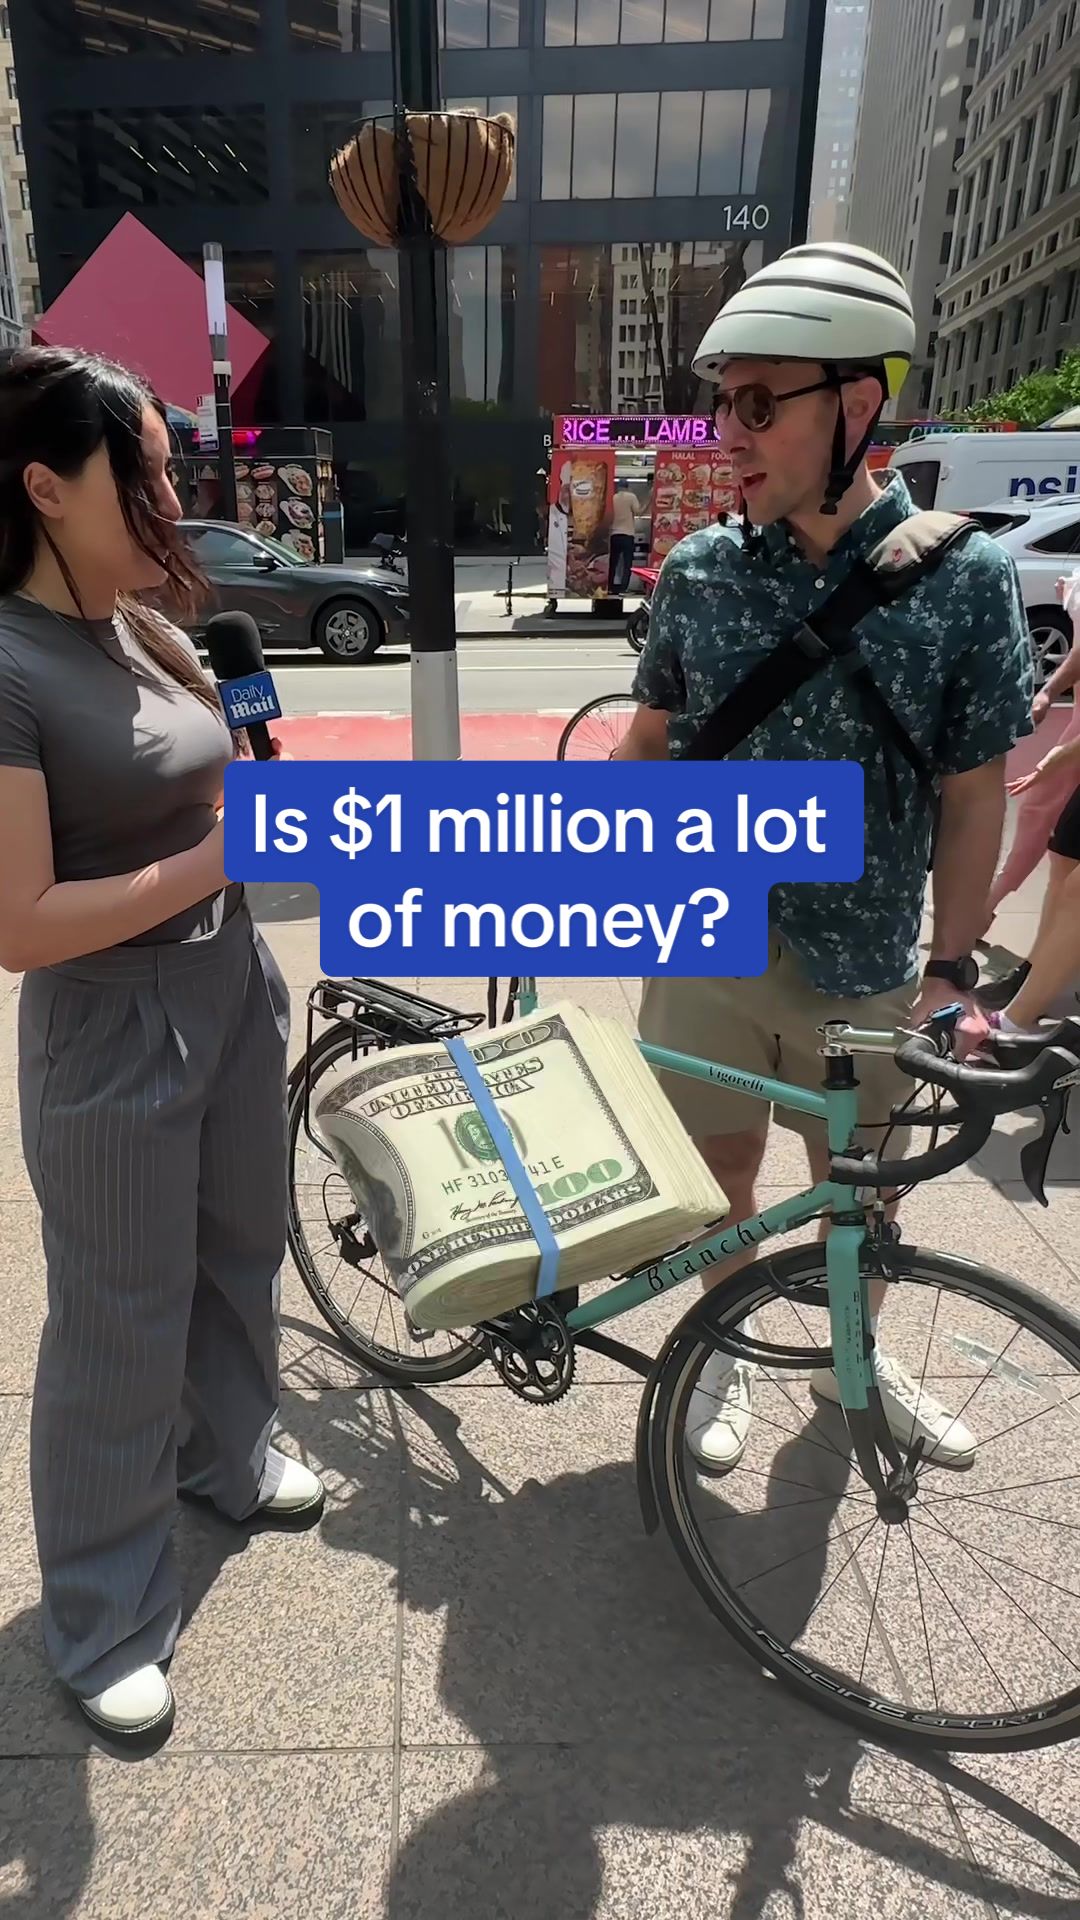 1 in 24 people in New York are millionaires 👀 Does $1,000,000 still get you far? #money #millionaire #newyork #bank #nyc #finance #trustfund #manonthestreet #fyp